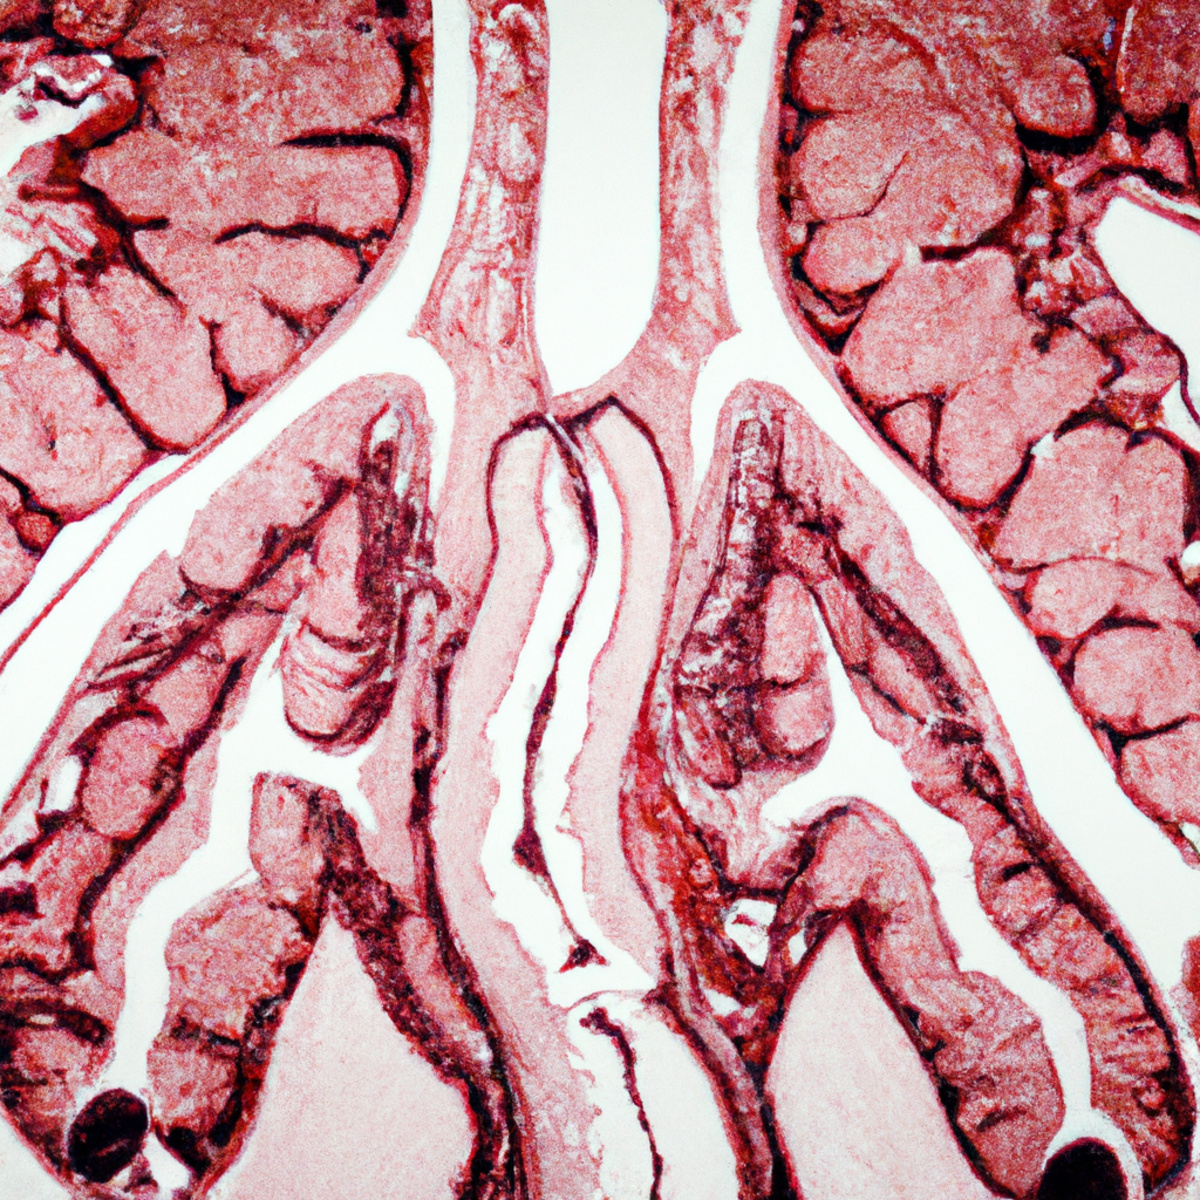 Close-up of human stomach with intricate network of blood vessels, showcasing red, linear patterns of Gastric Antral Vascular Ectasia (GAVE).